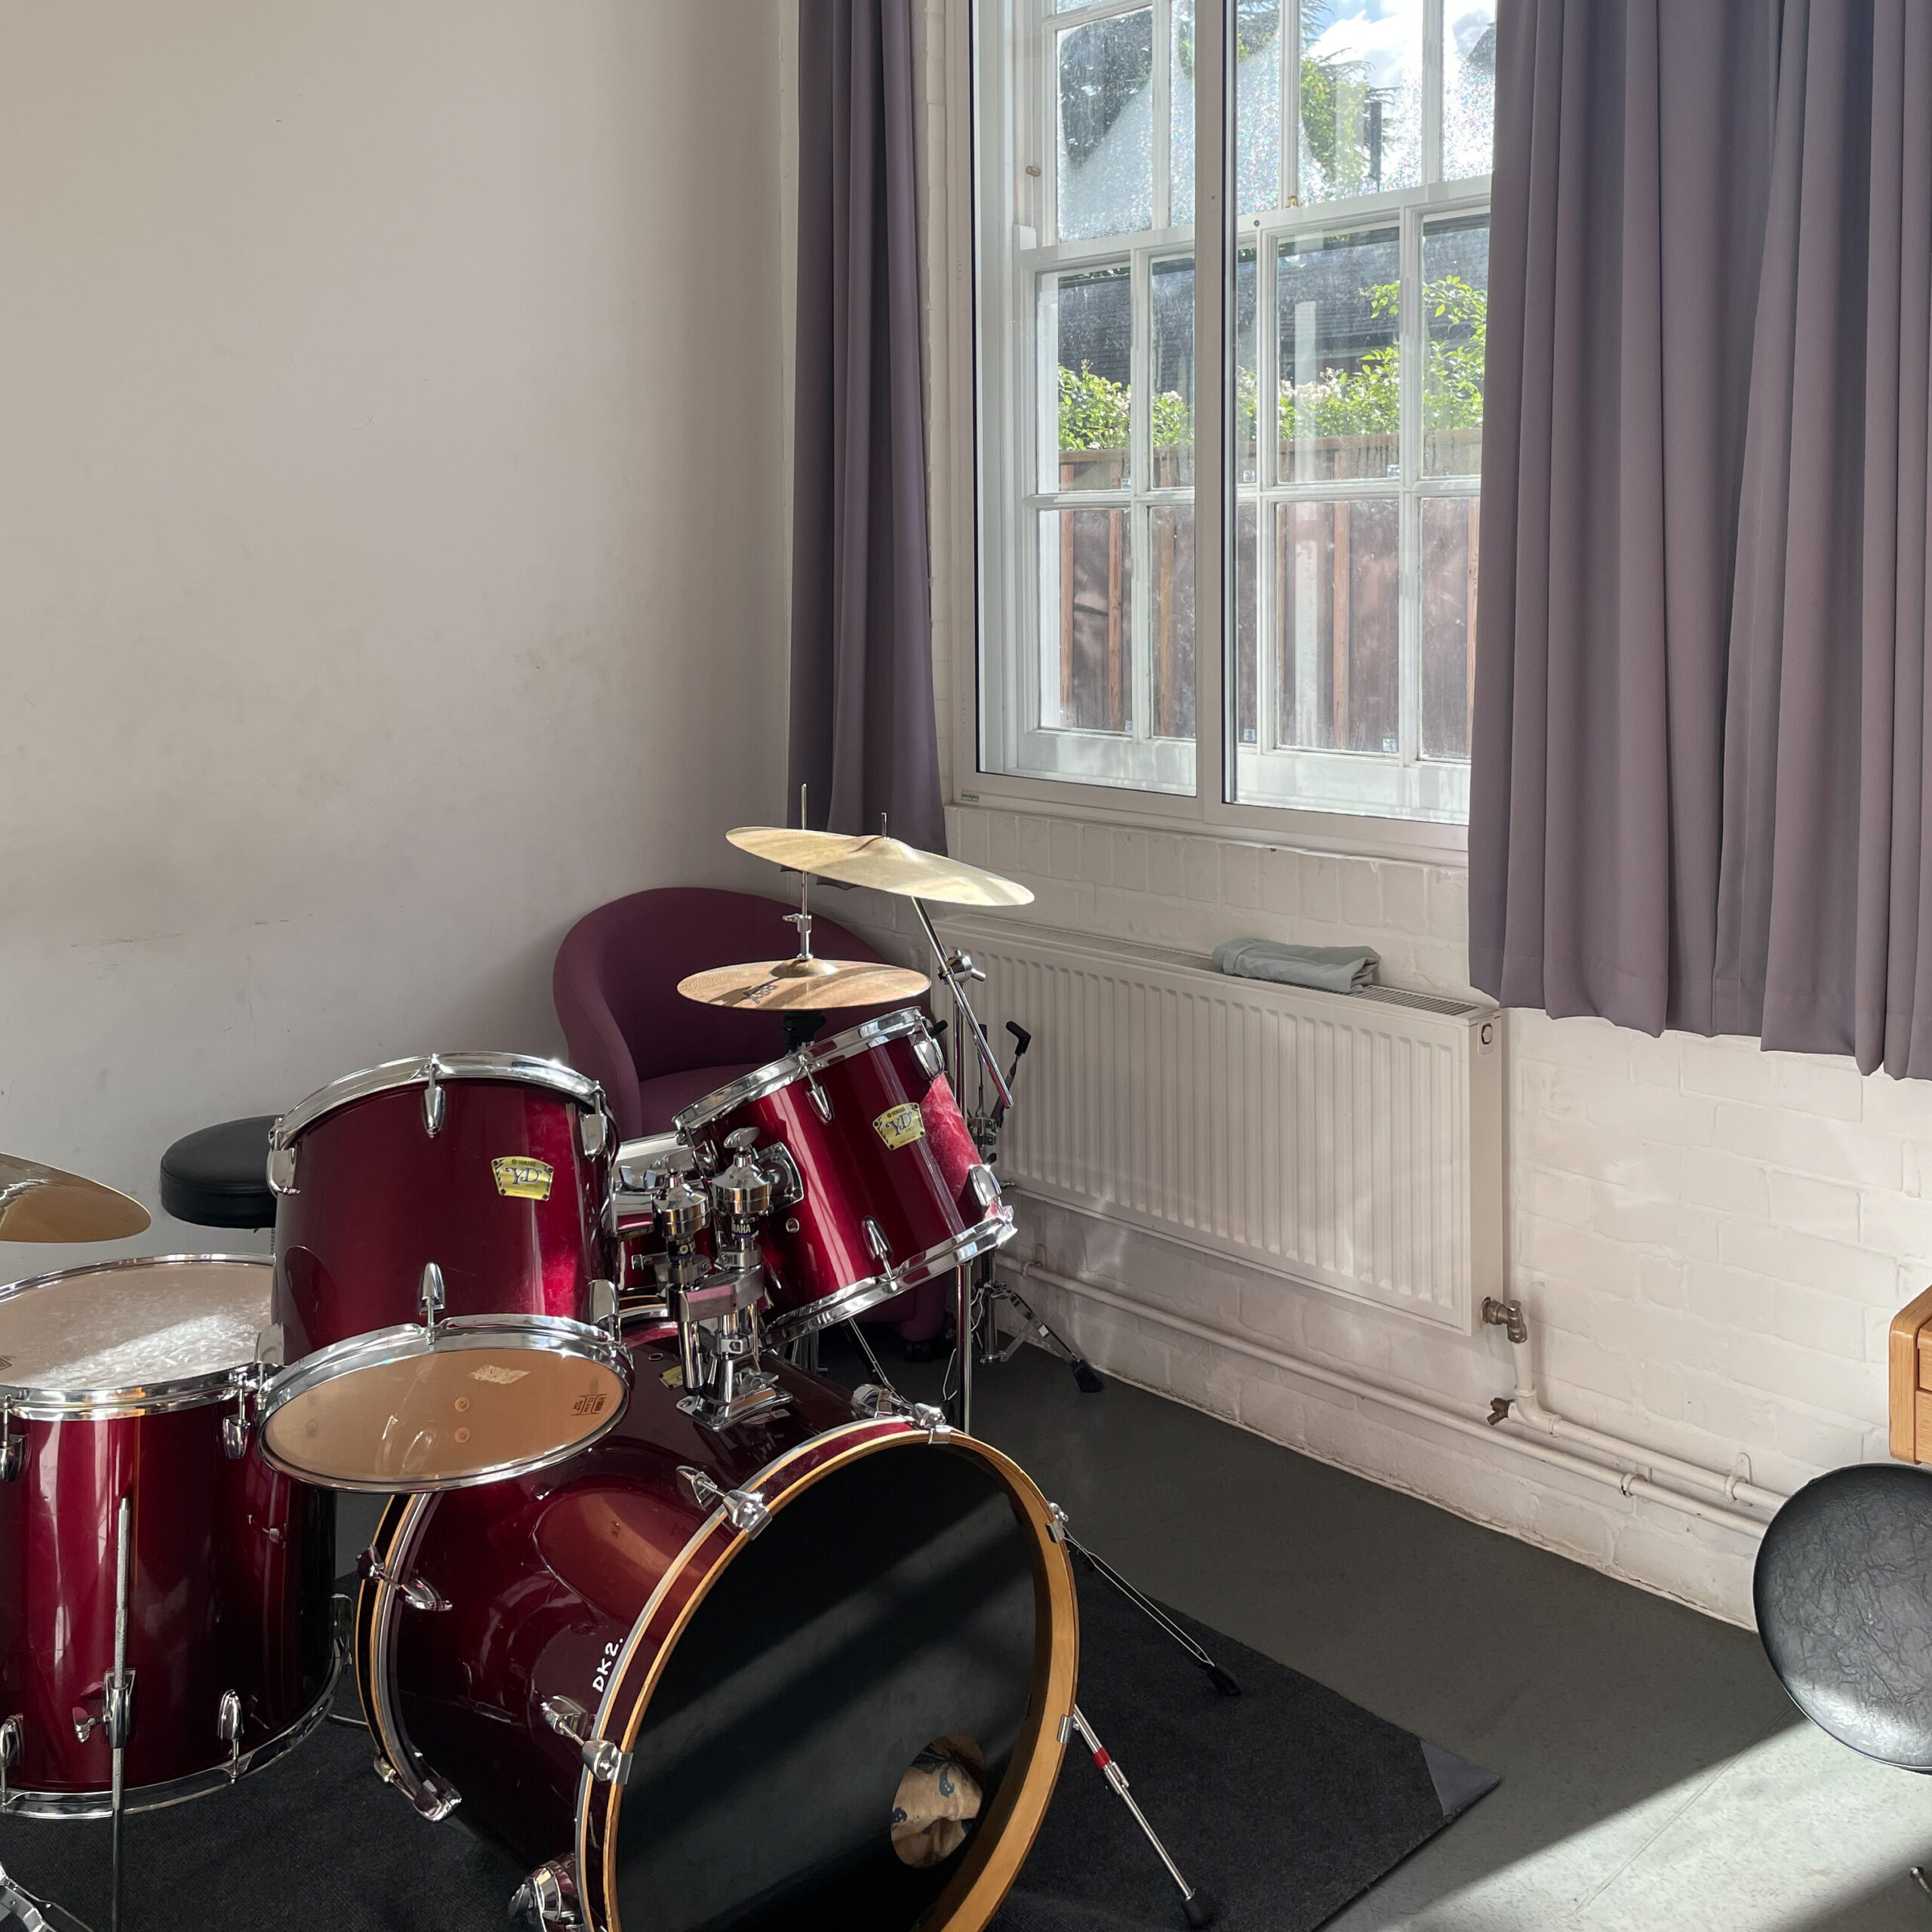 drum kit in a music room